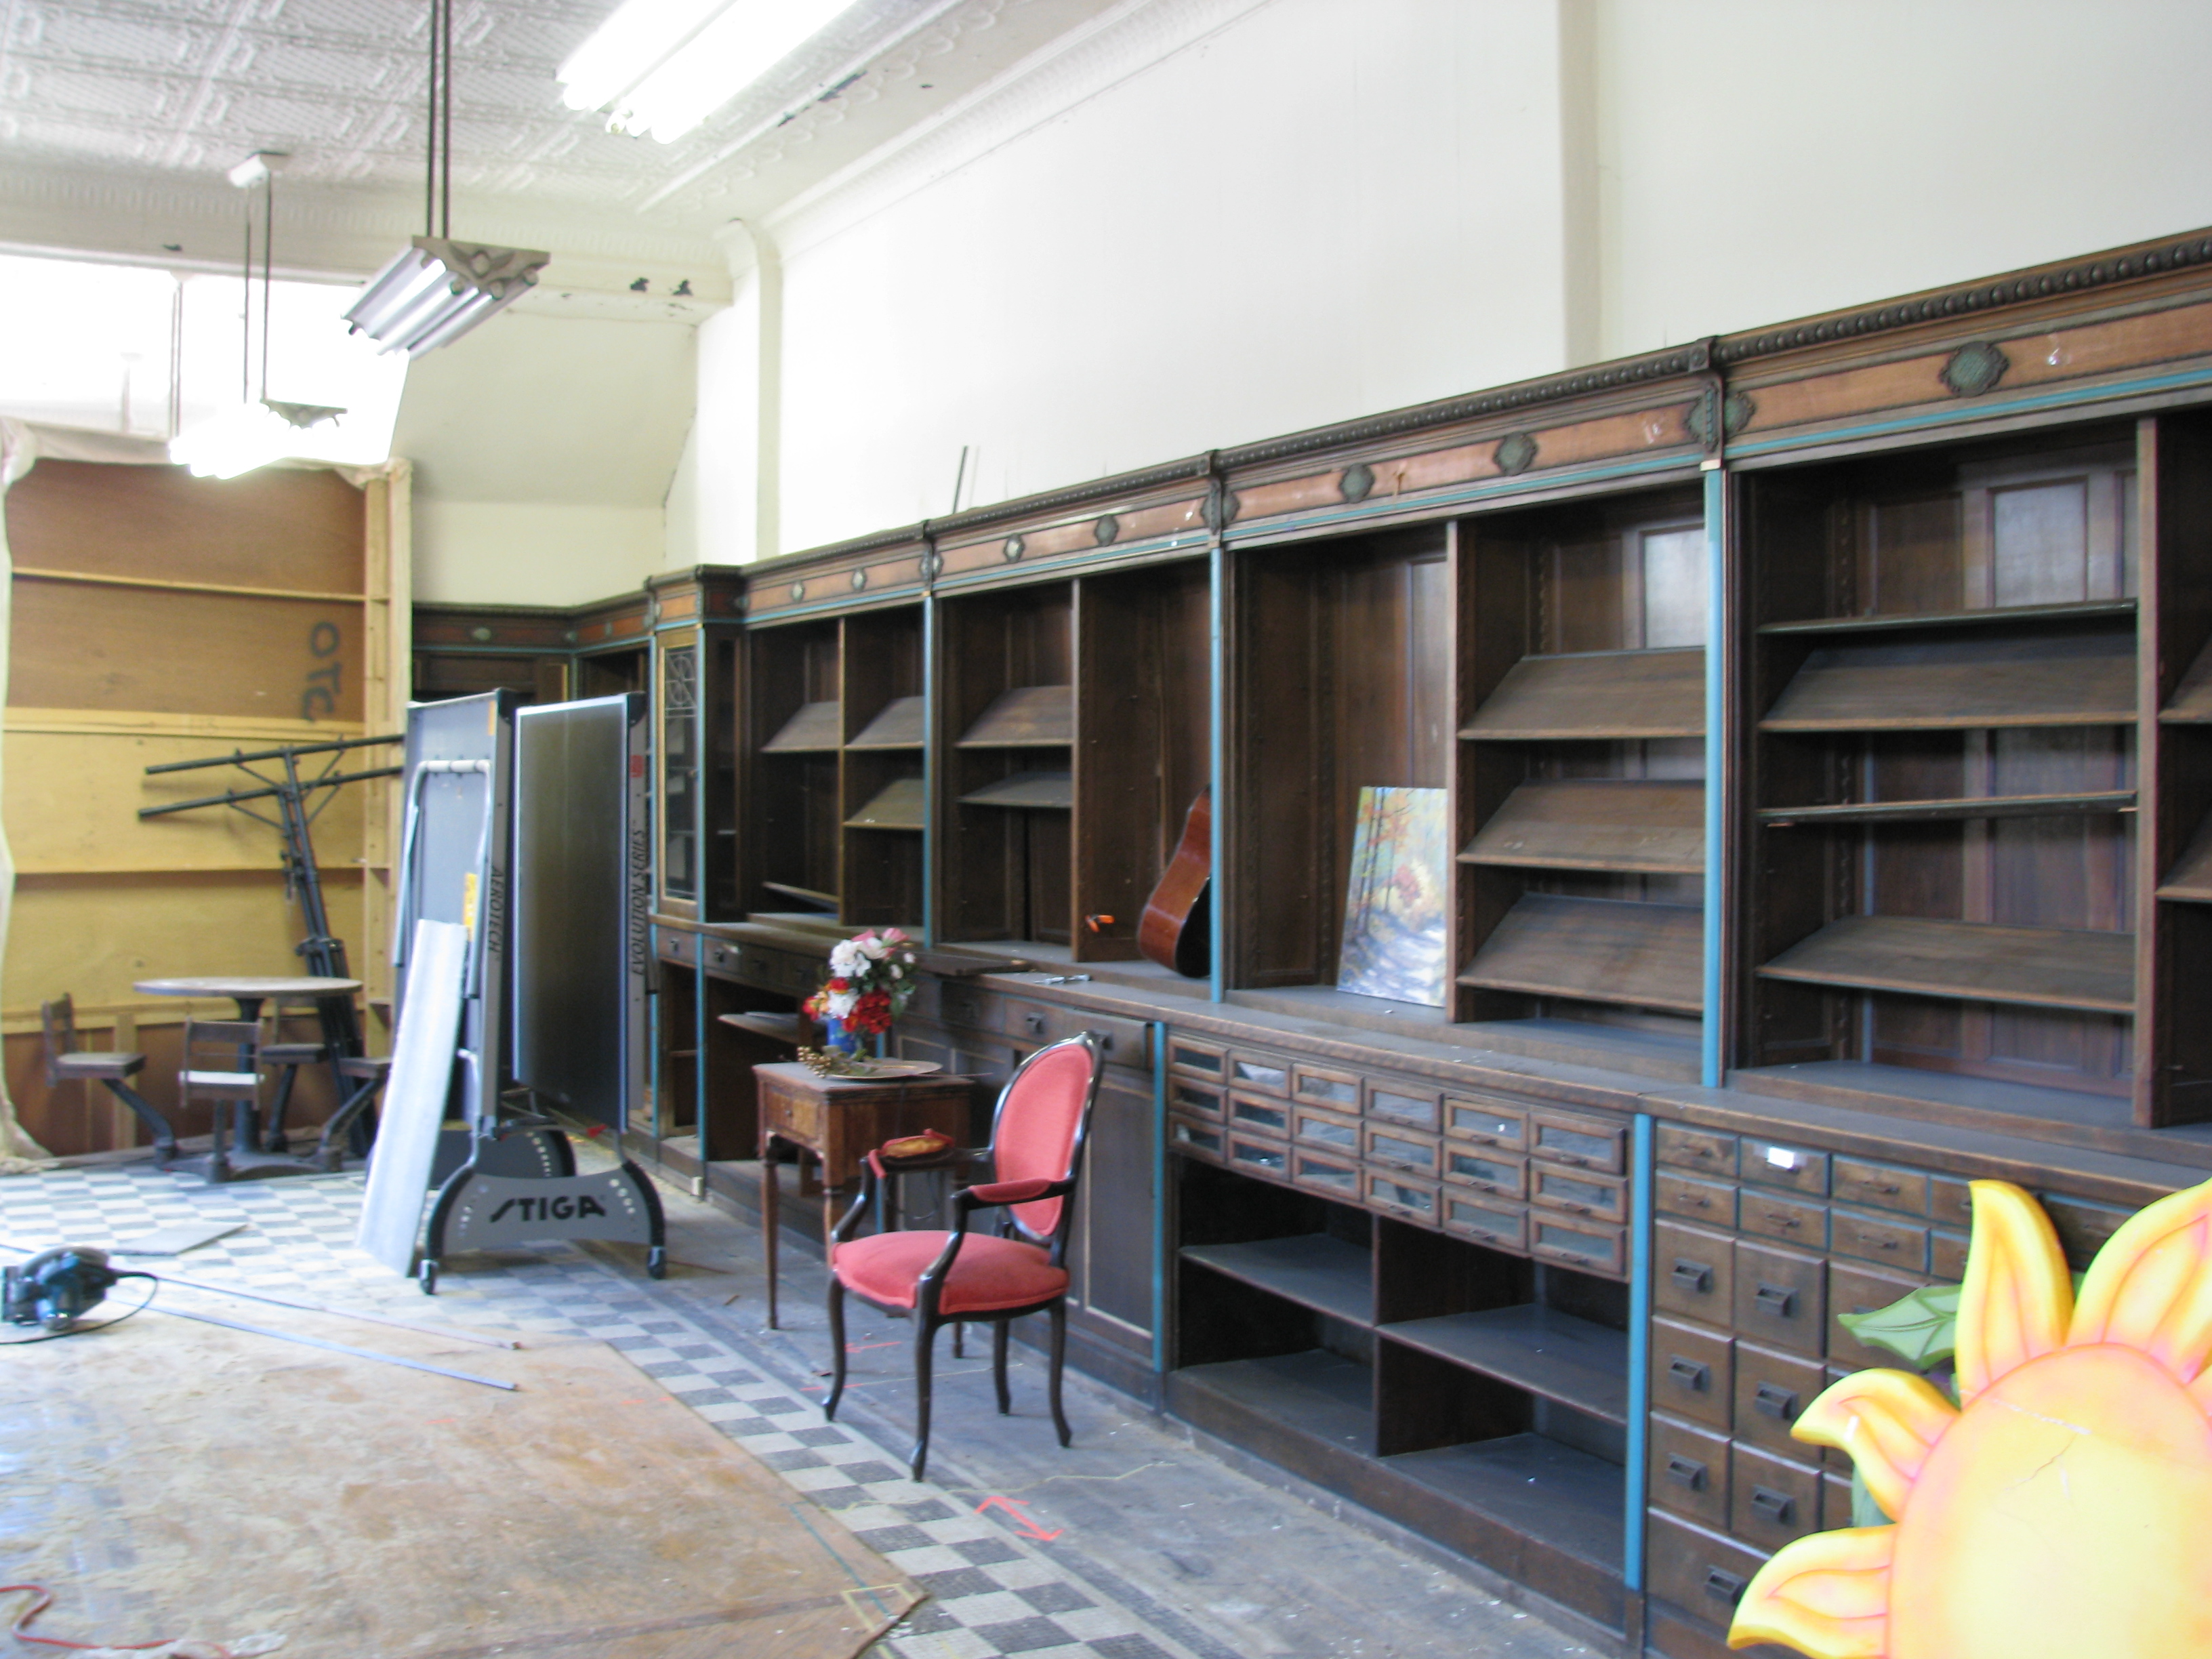 Maplewood History: The Spectacular Cabinetry of the Harper’s Pharmacy